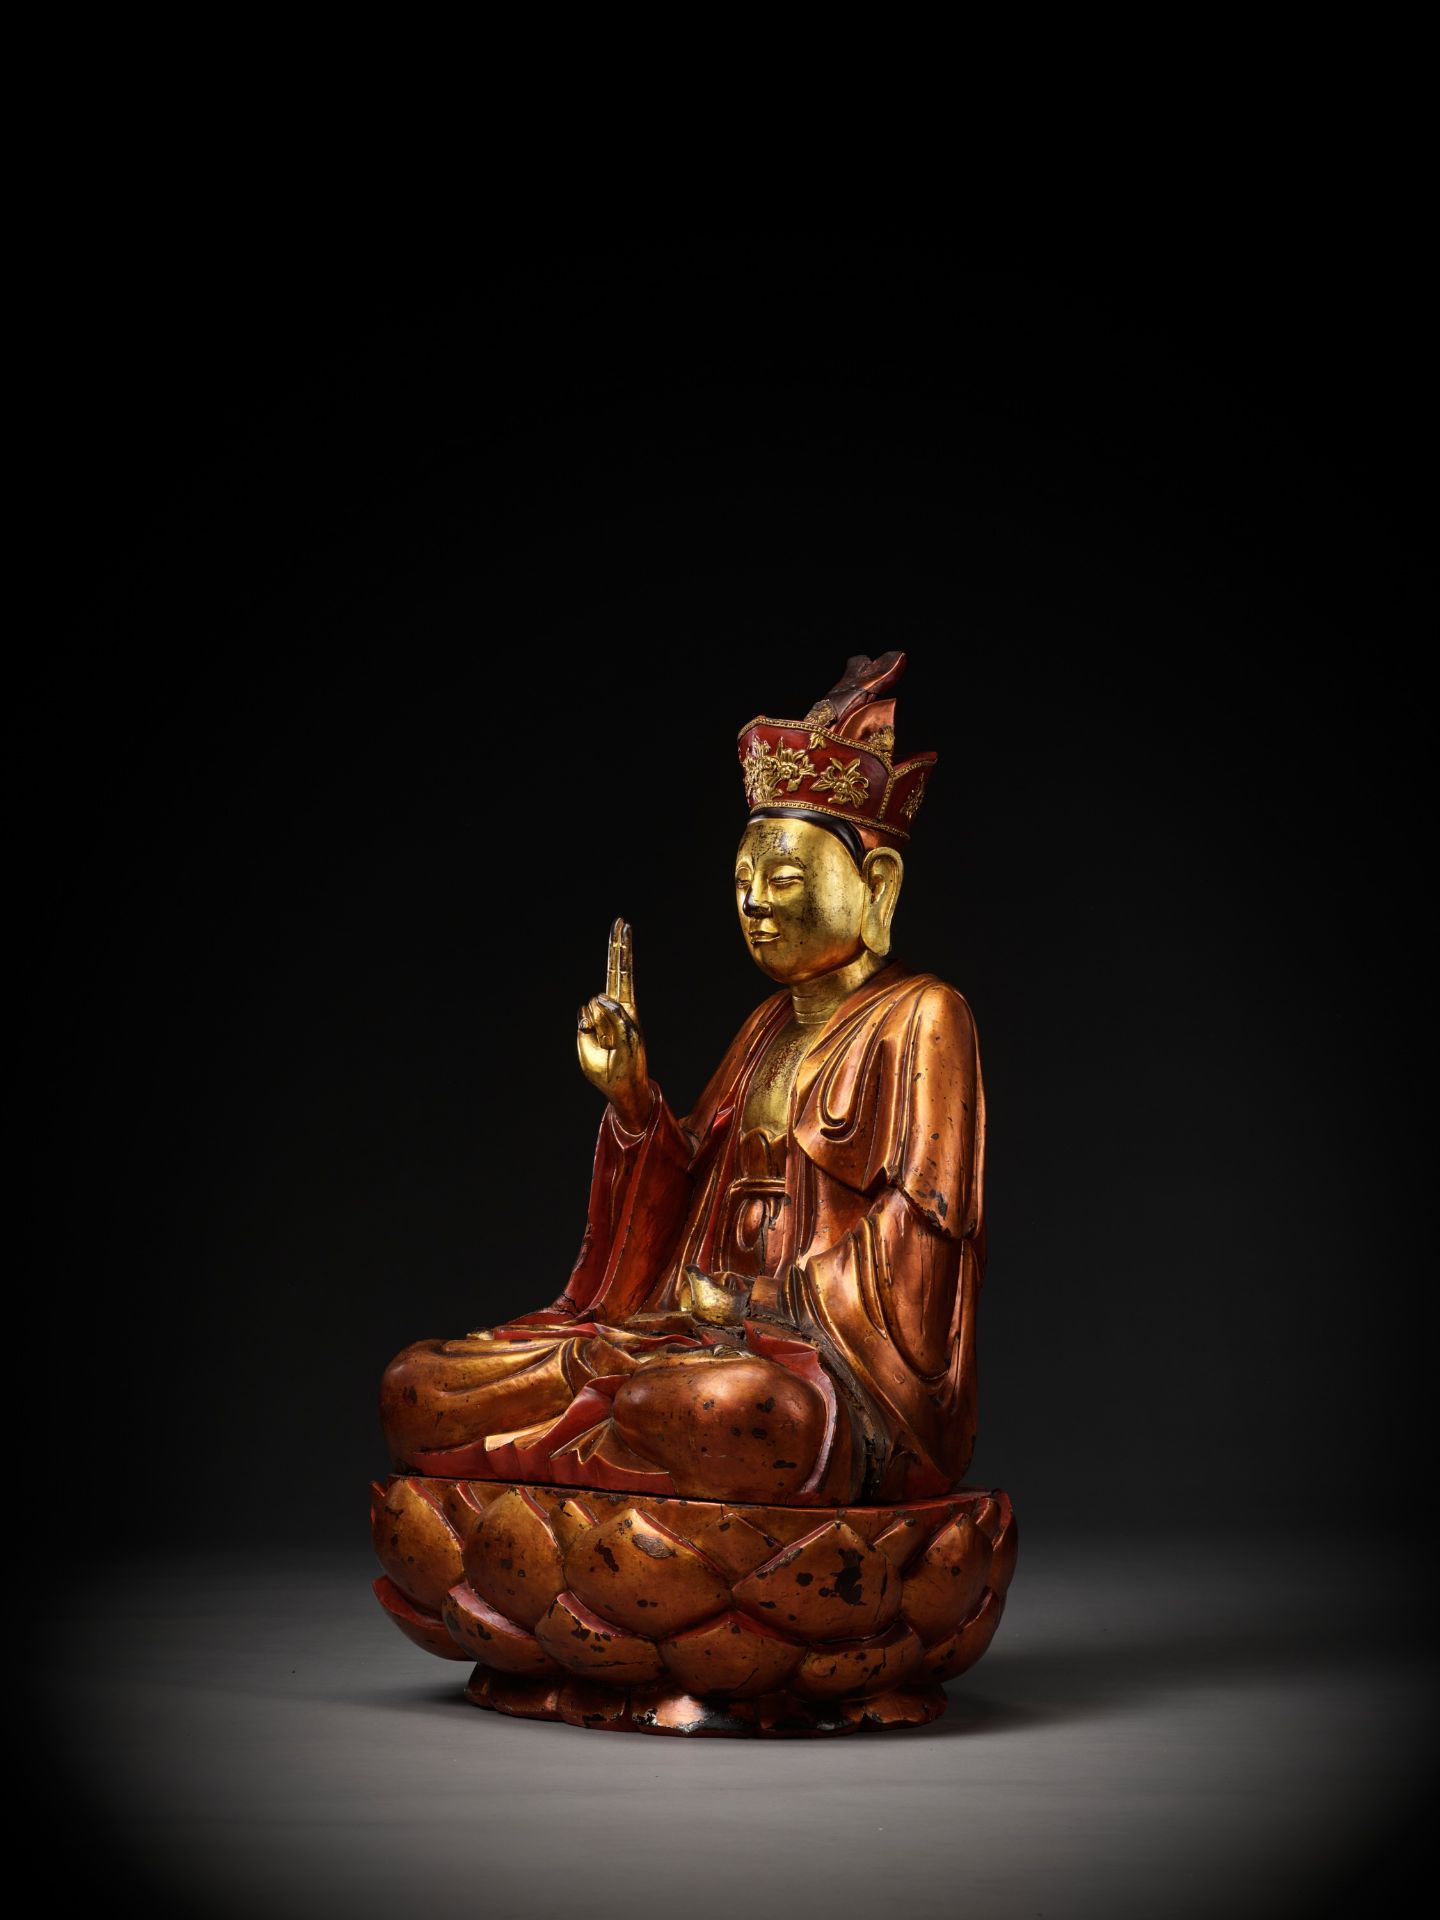 A LARGE GILT-LACQUERED WOOD FIGURE OF A BODHISATTVA, VIETNAM, 17TH-18TH CENTURY - Image 6 of 14